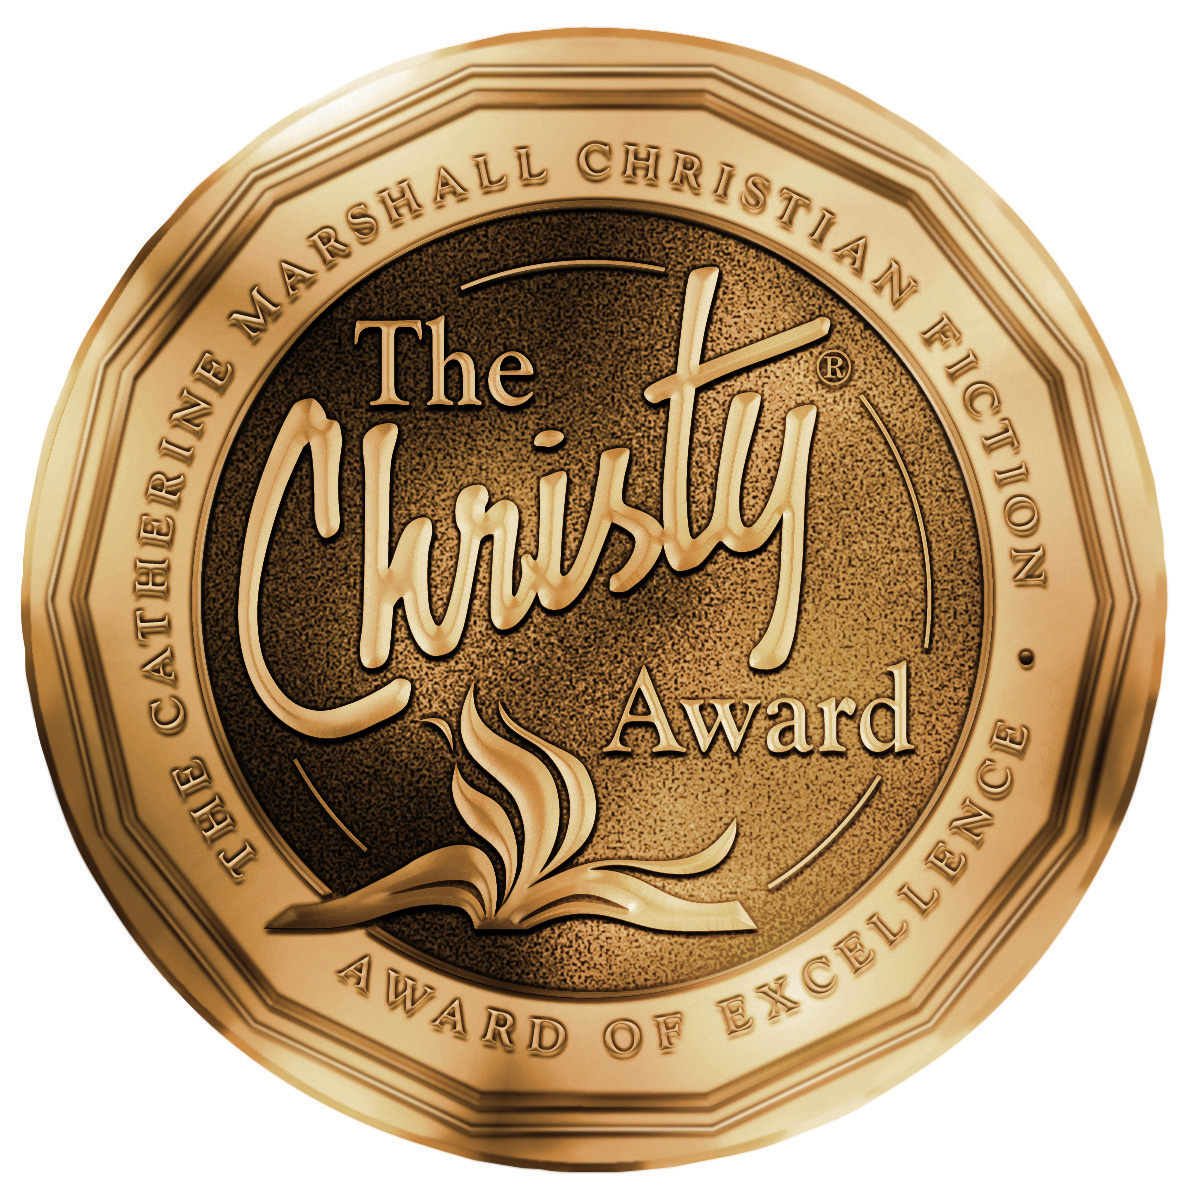 Wedded to War a Double Finalist in the Christy Awards